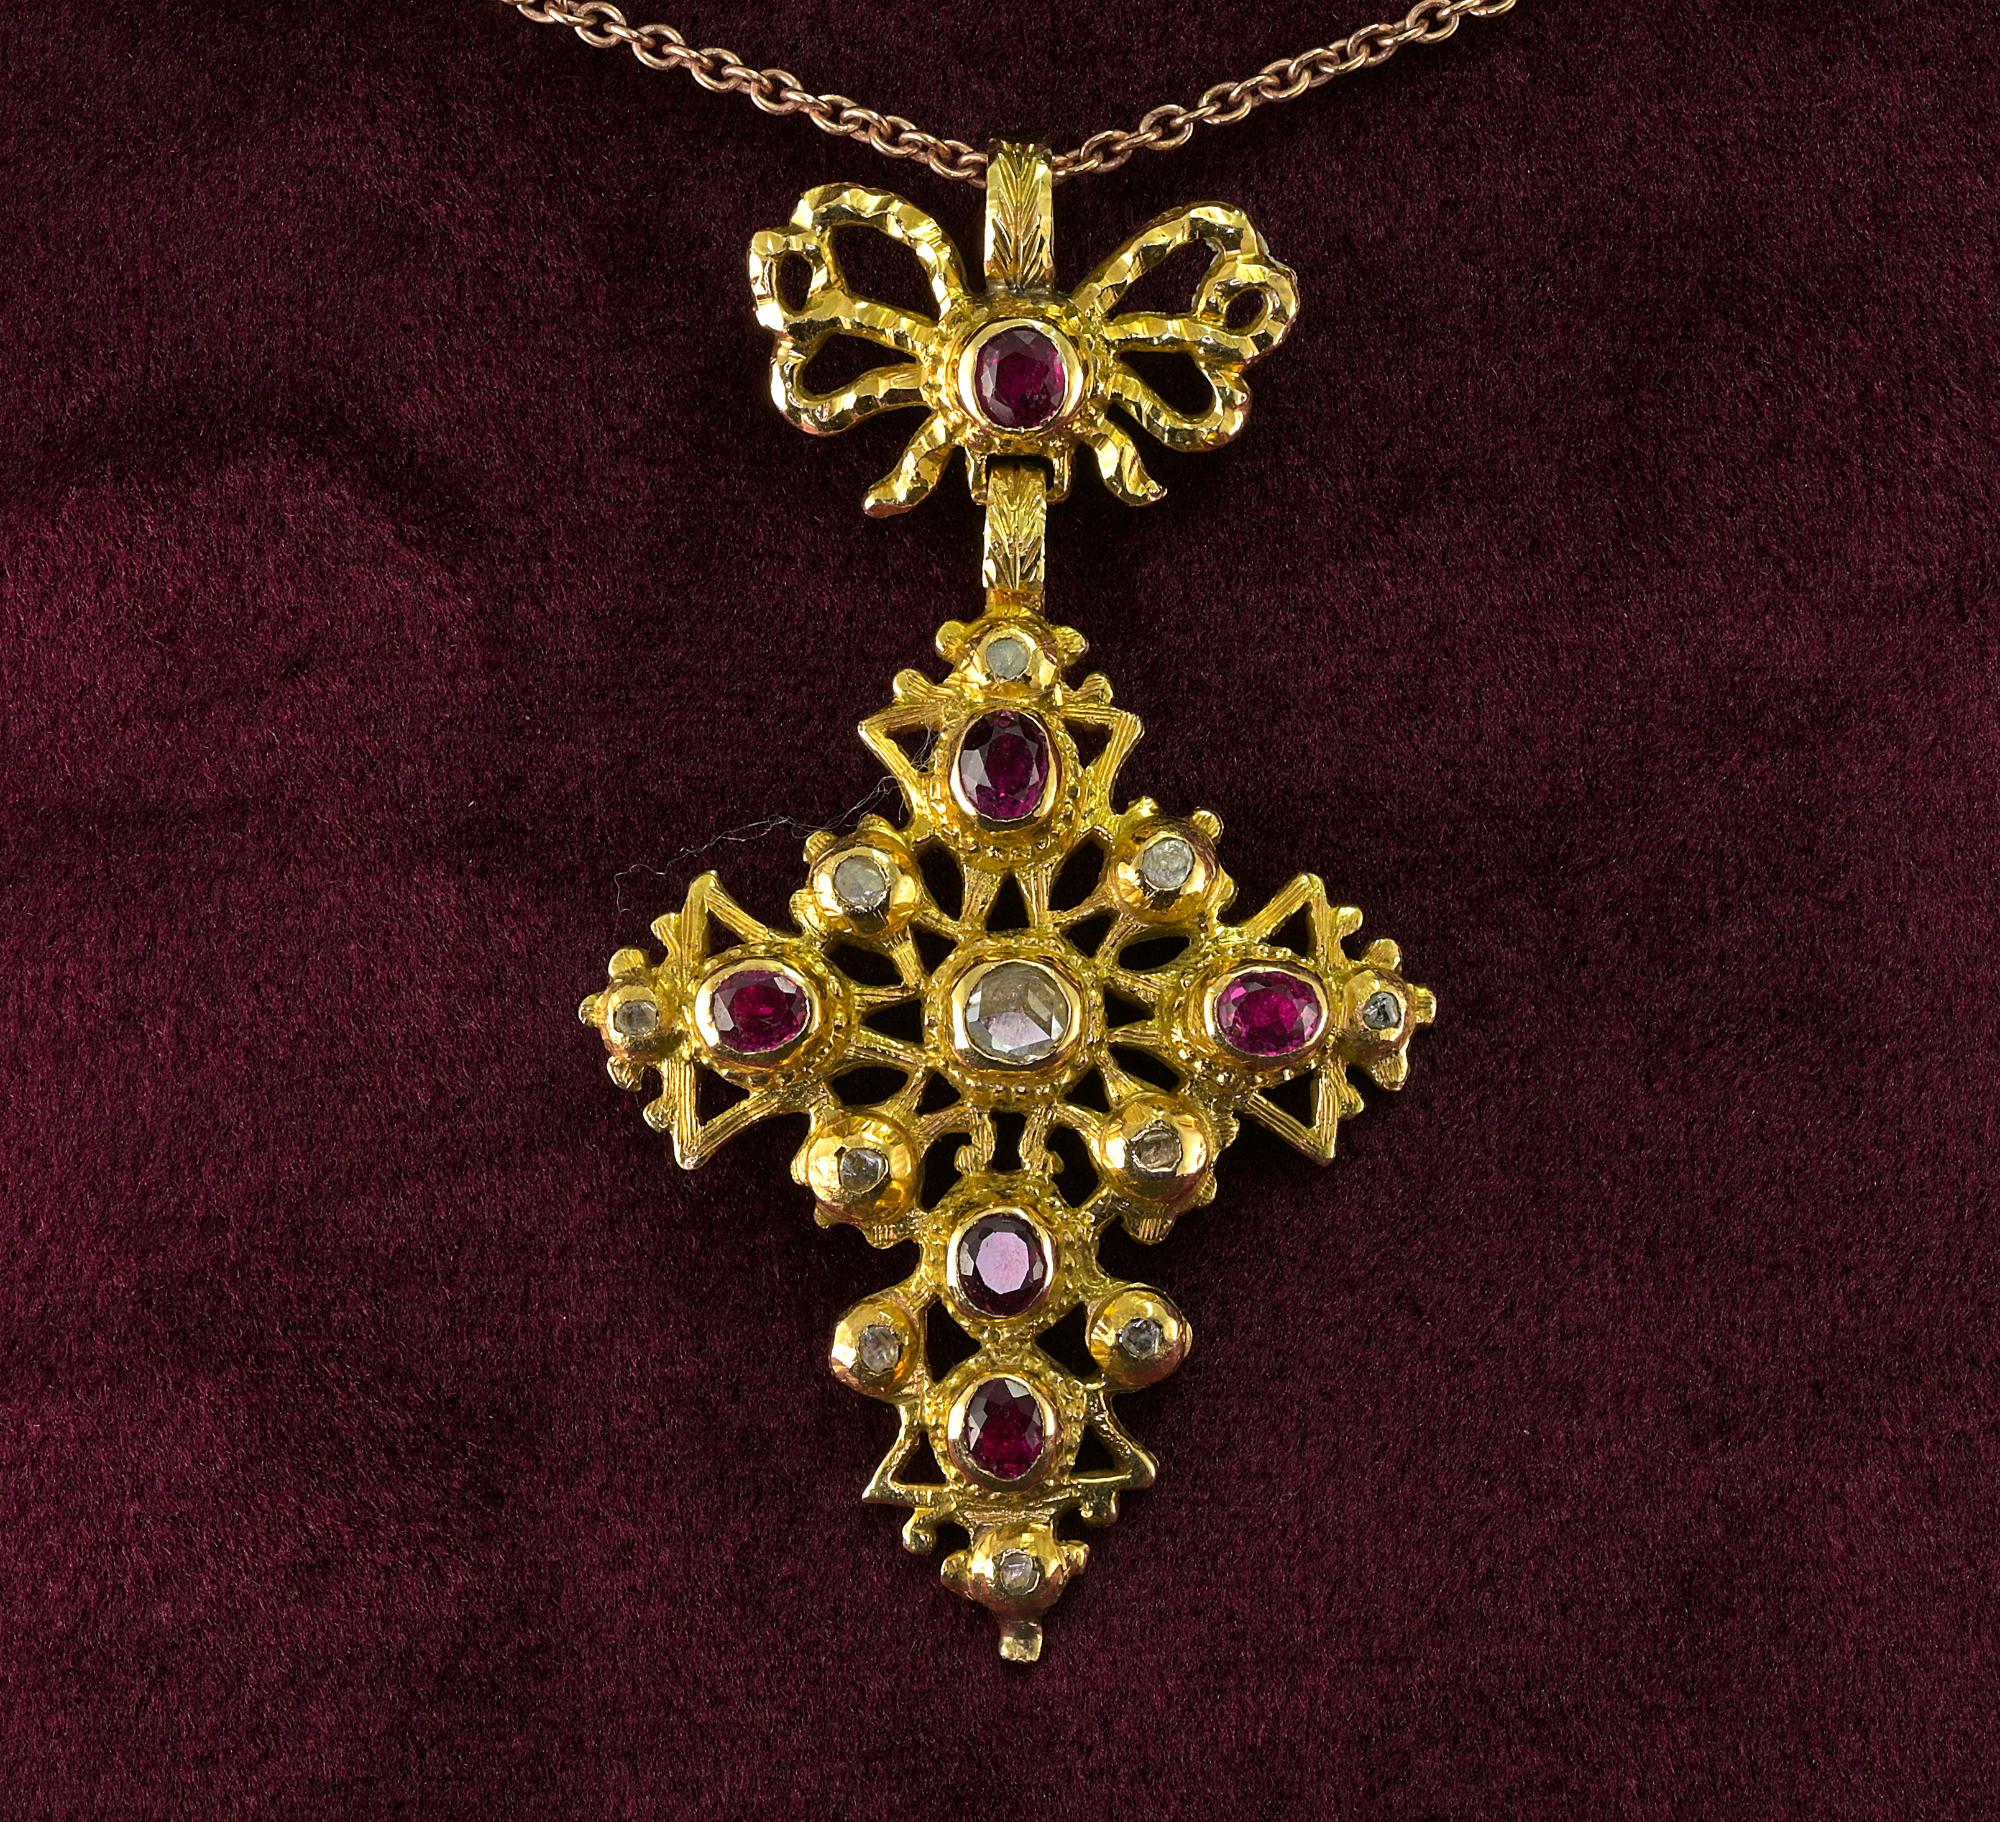 This rare Georgian period cross pendant is 1770 ca
22 Kt solid gold, superb design artful made throughout, adorned with red pigeon blood natural Rubies, our estimate is 1.50 Ct and rose cut Diamonds, one larger in the middle and little accent